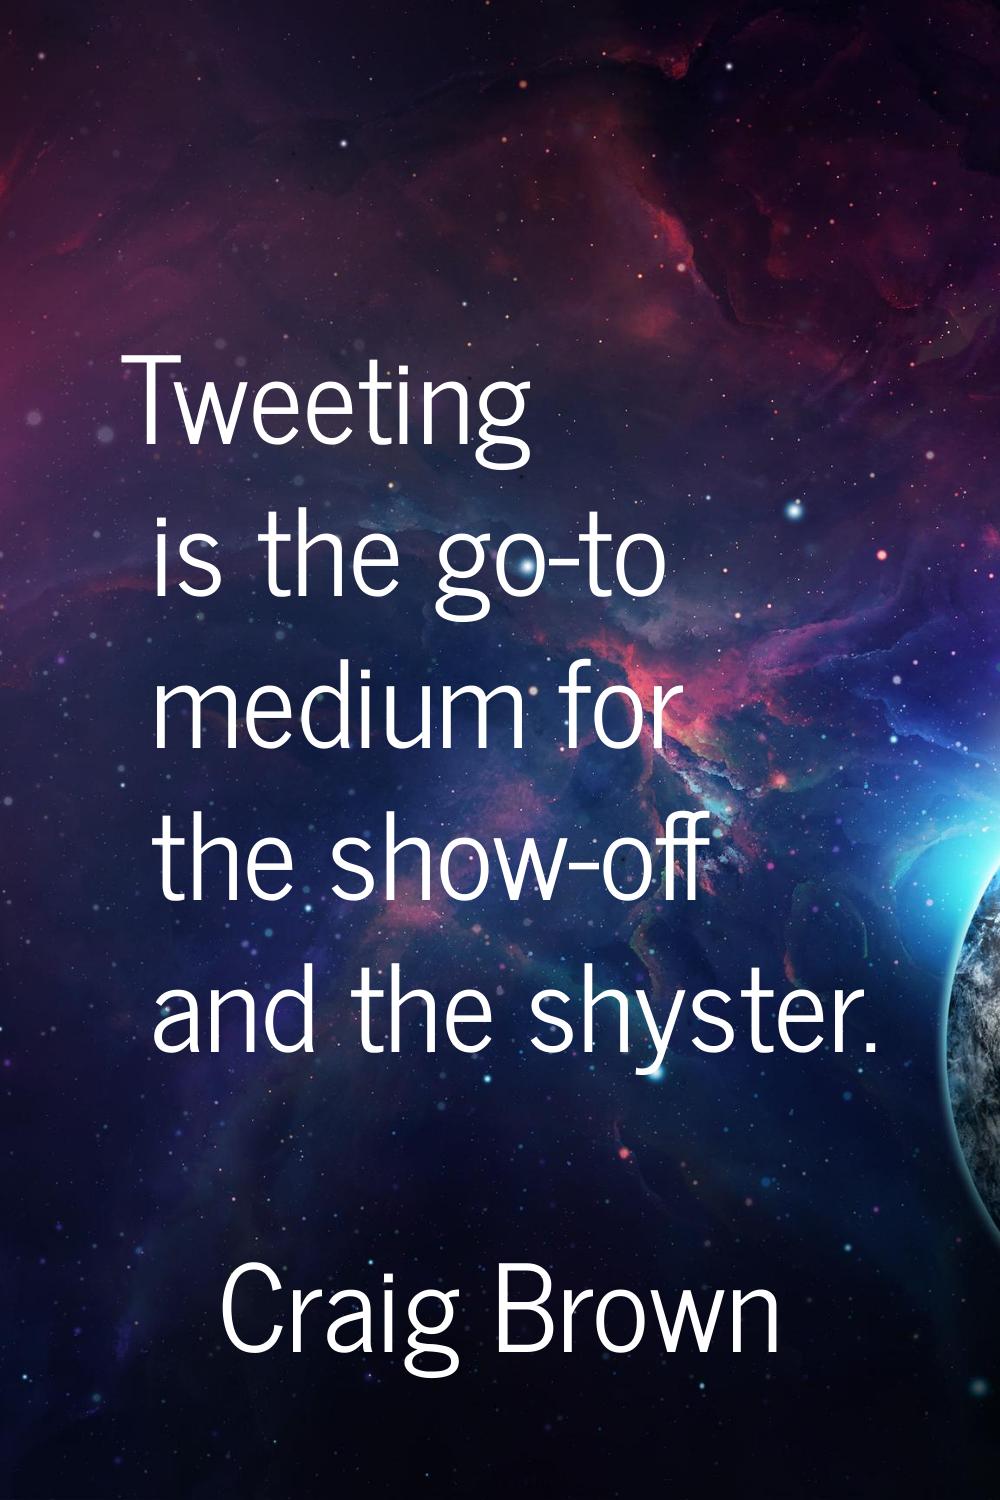 Tweeting is the go-to medium for the show-off and the shyster.